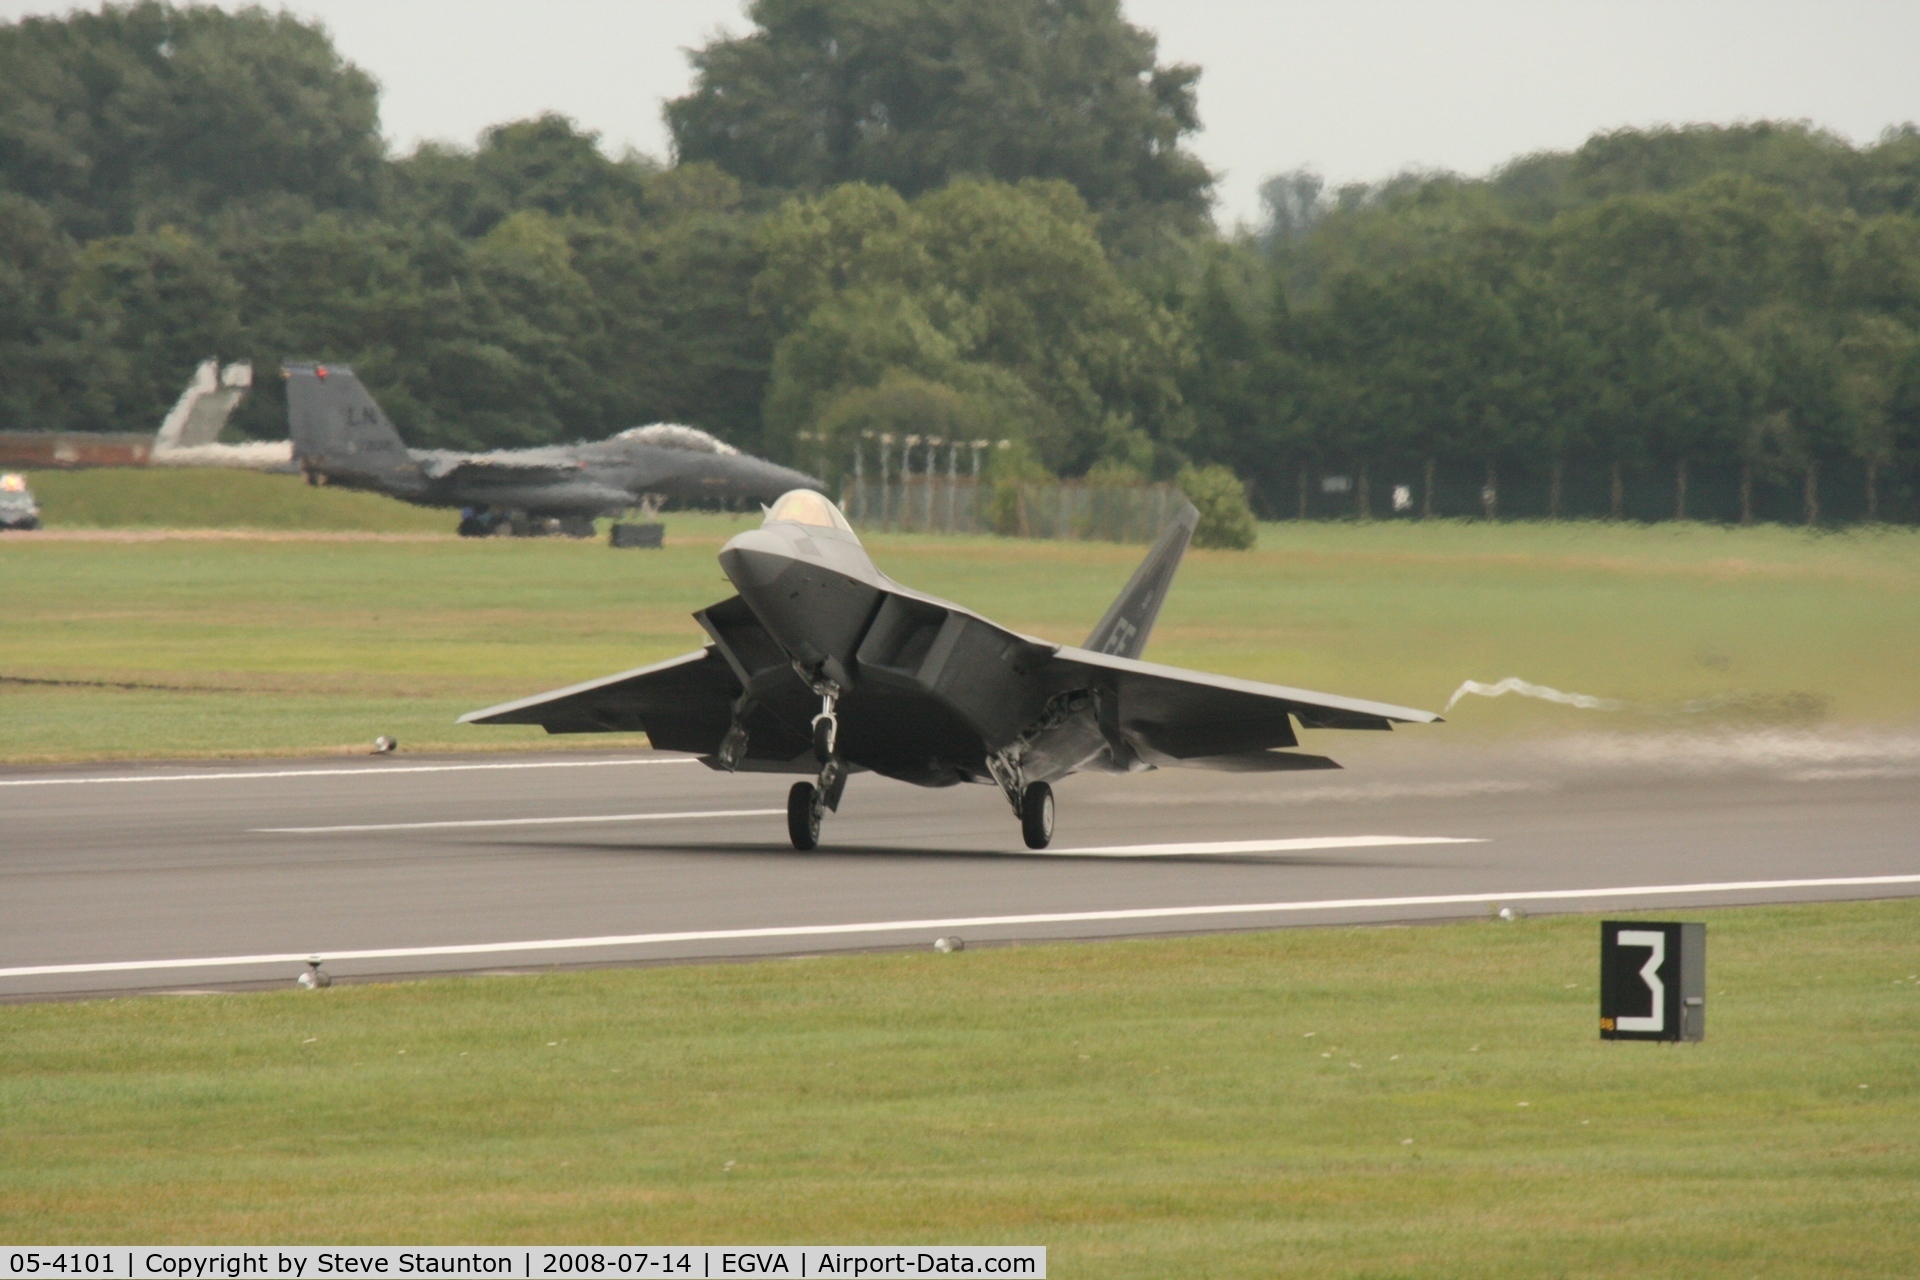 05-4101, 2003 Lockheed Martin F-22A Raptor C/N 645-4101, Taken at the Royal International Air Tattoo 2008 during arrivals and departures (show days cancelled due to bad weather)